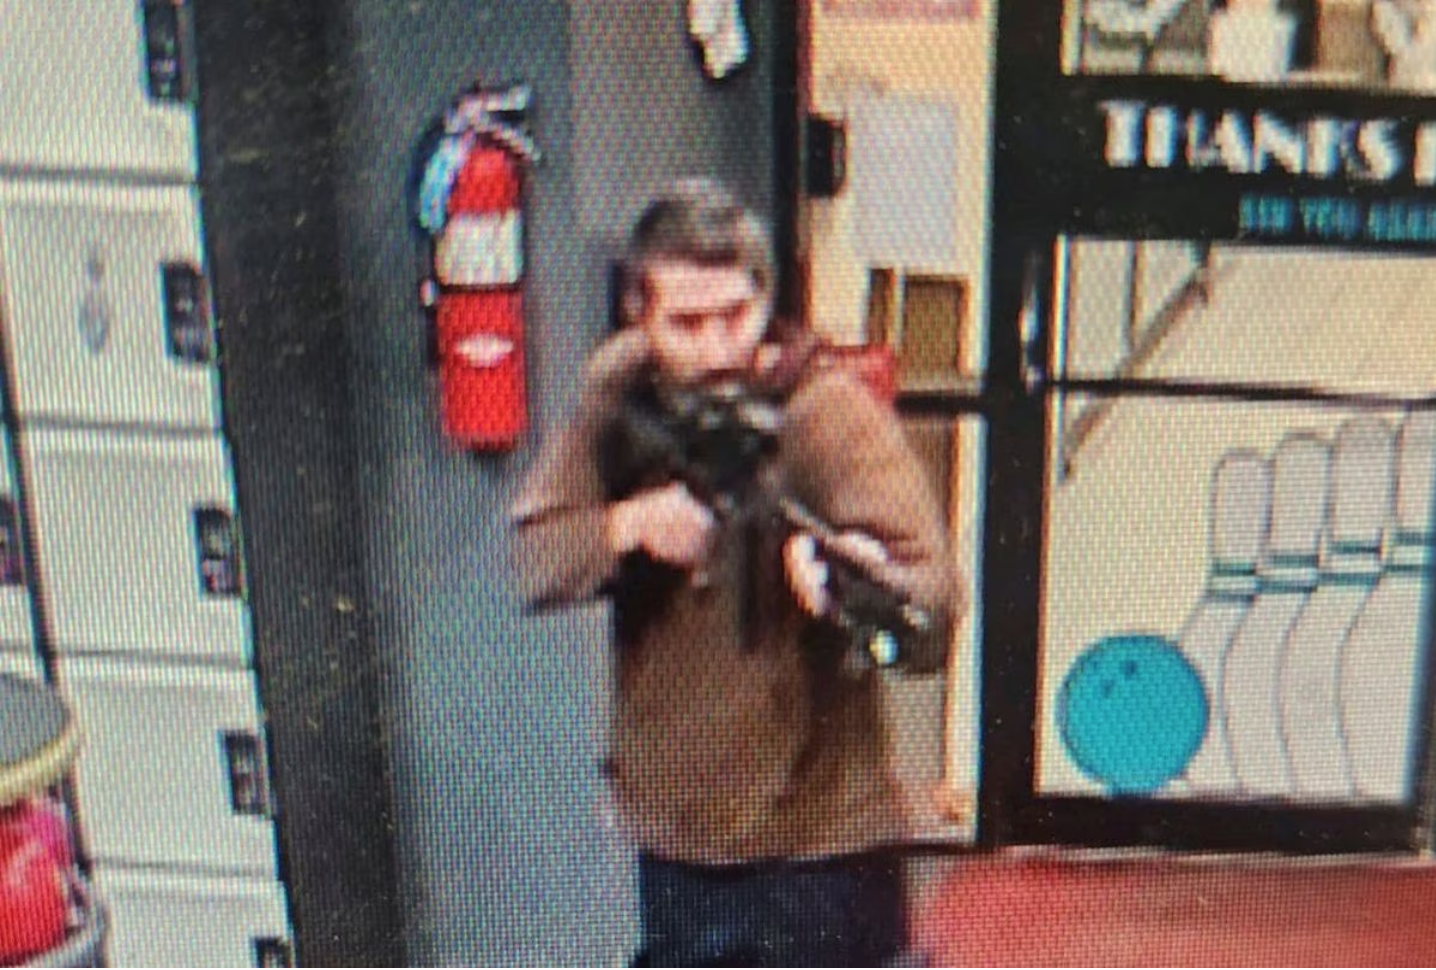 A man identified as a suspect by police points what appears to be a semiautomatic rifle, in Lewiston, Maine, U.S.